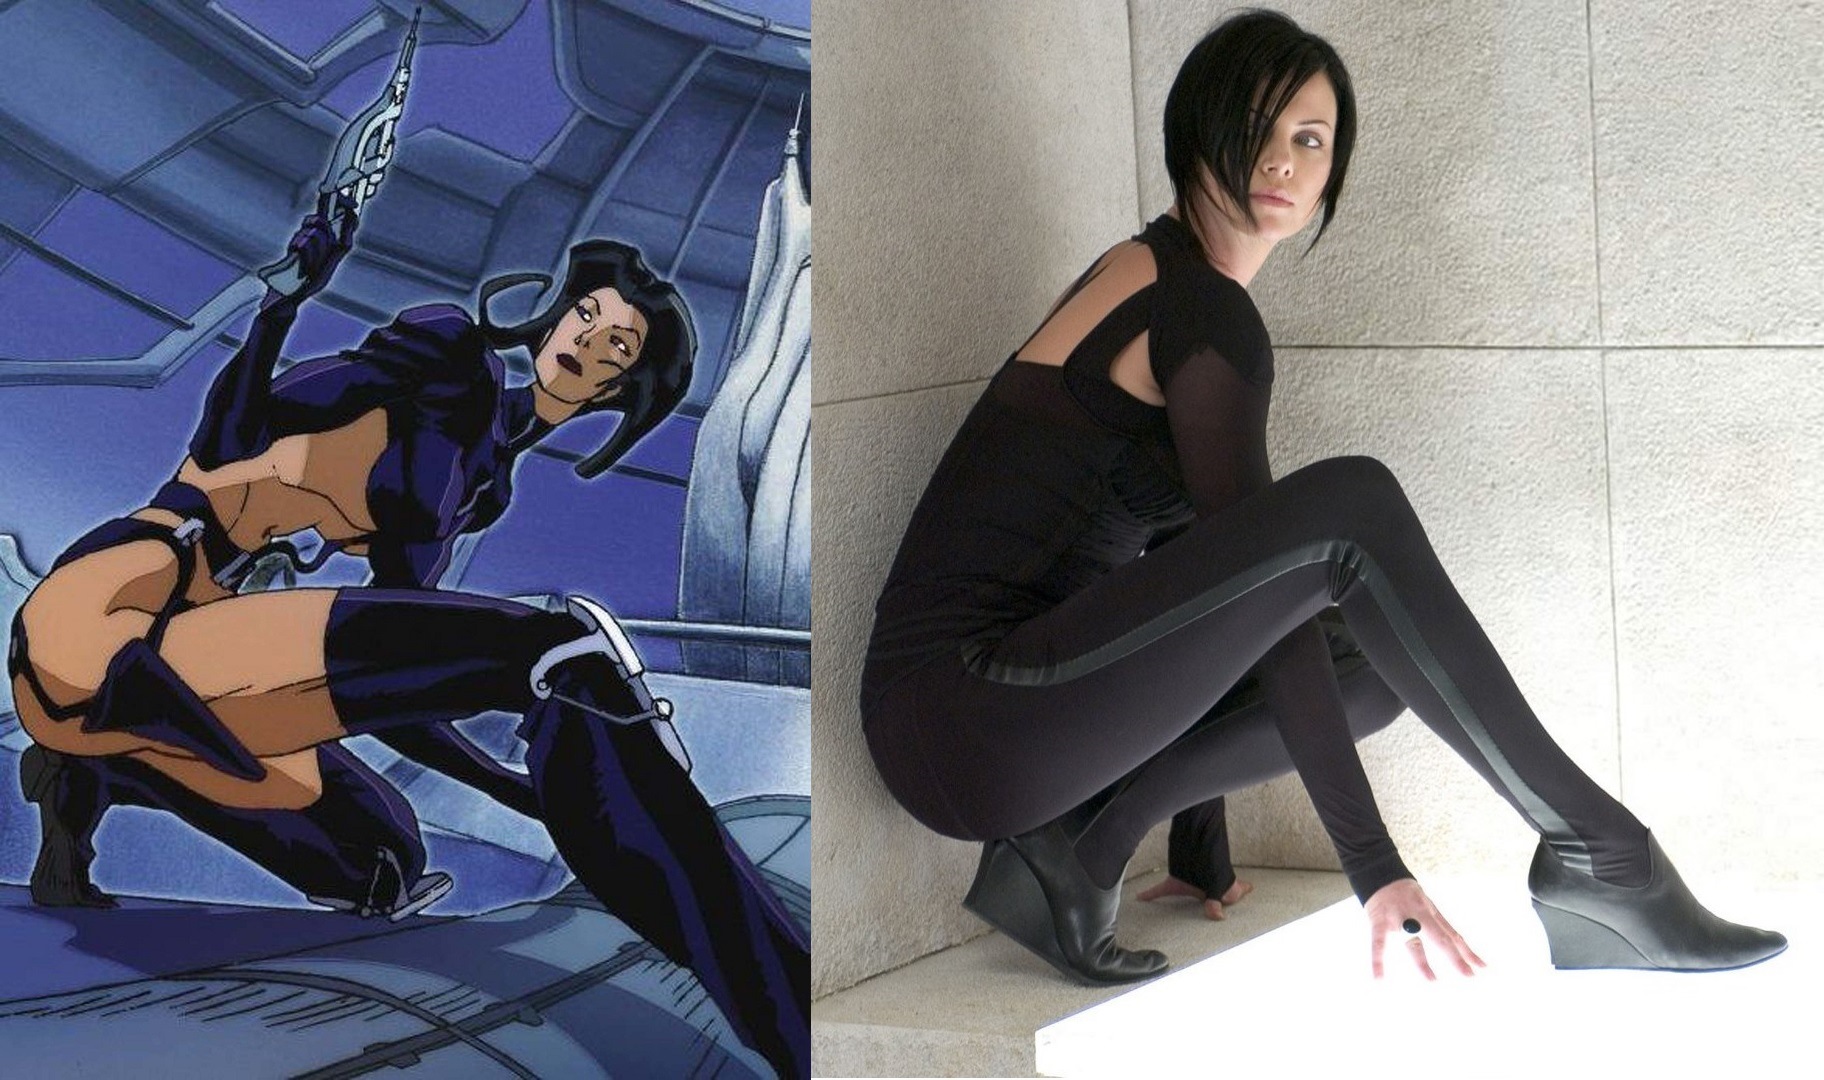 Aeon Flux the animated version vs Charlize Theron in live-action